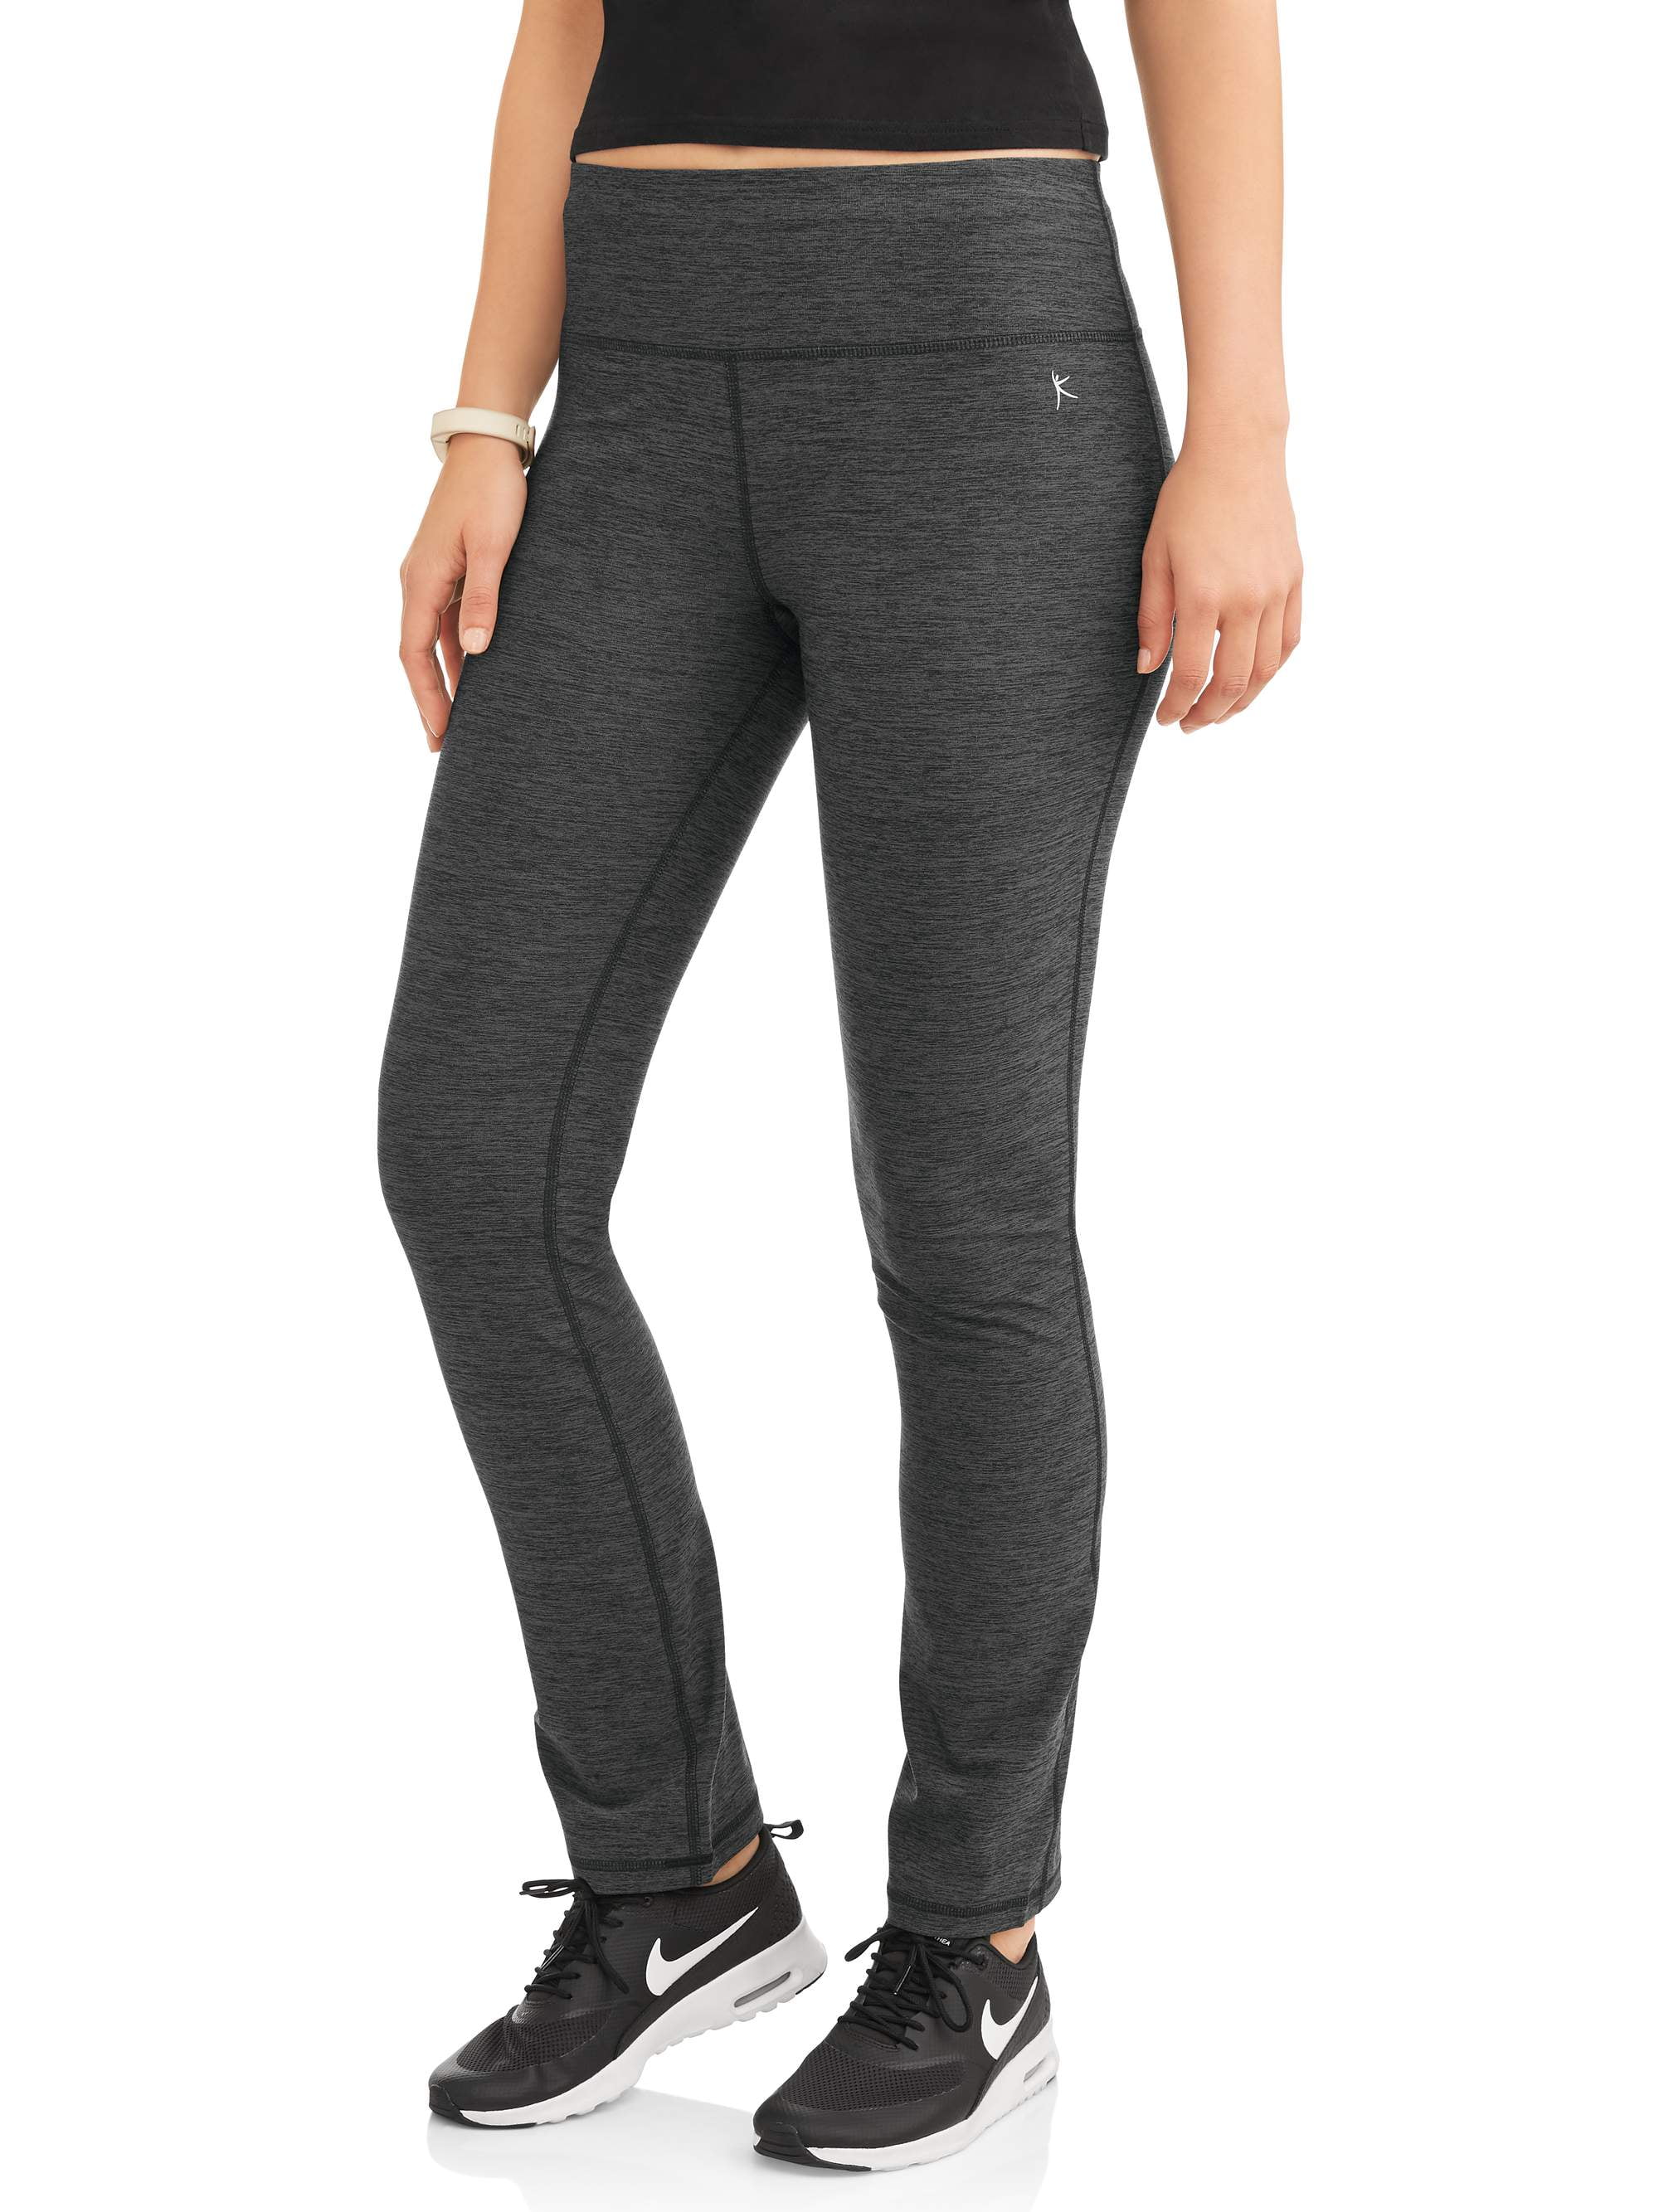 Costco Danskin Leggings Reviewers  International Society of Precision  Agriculture